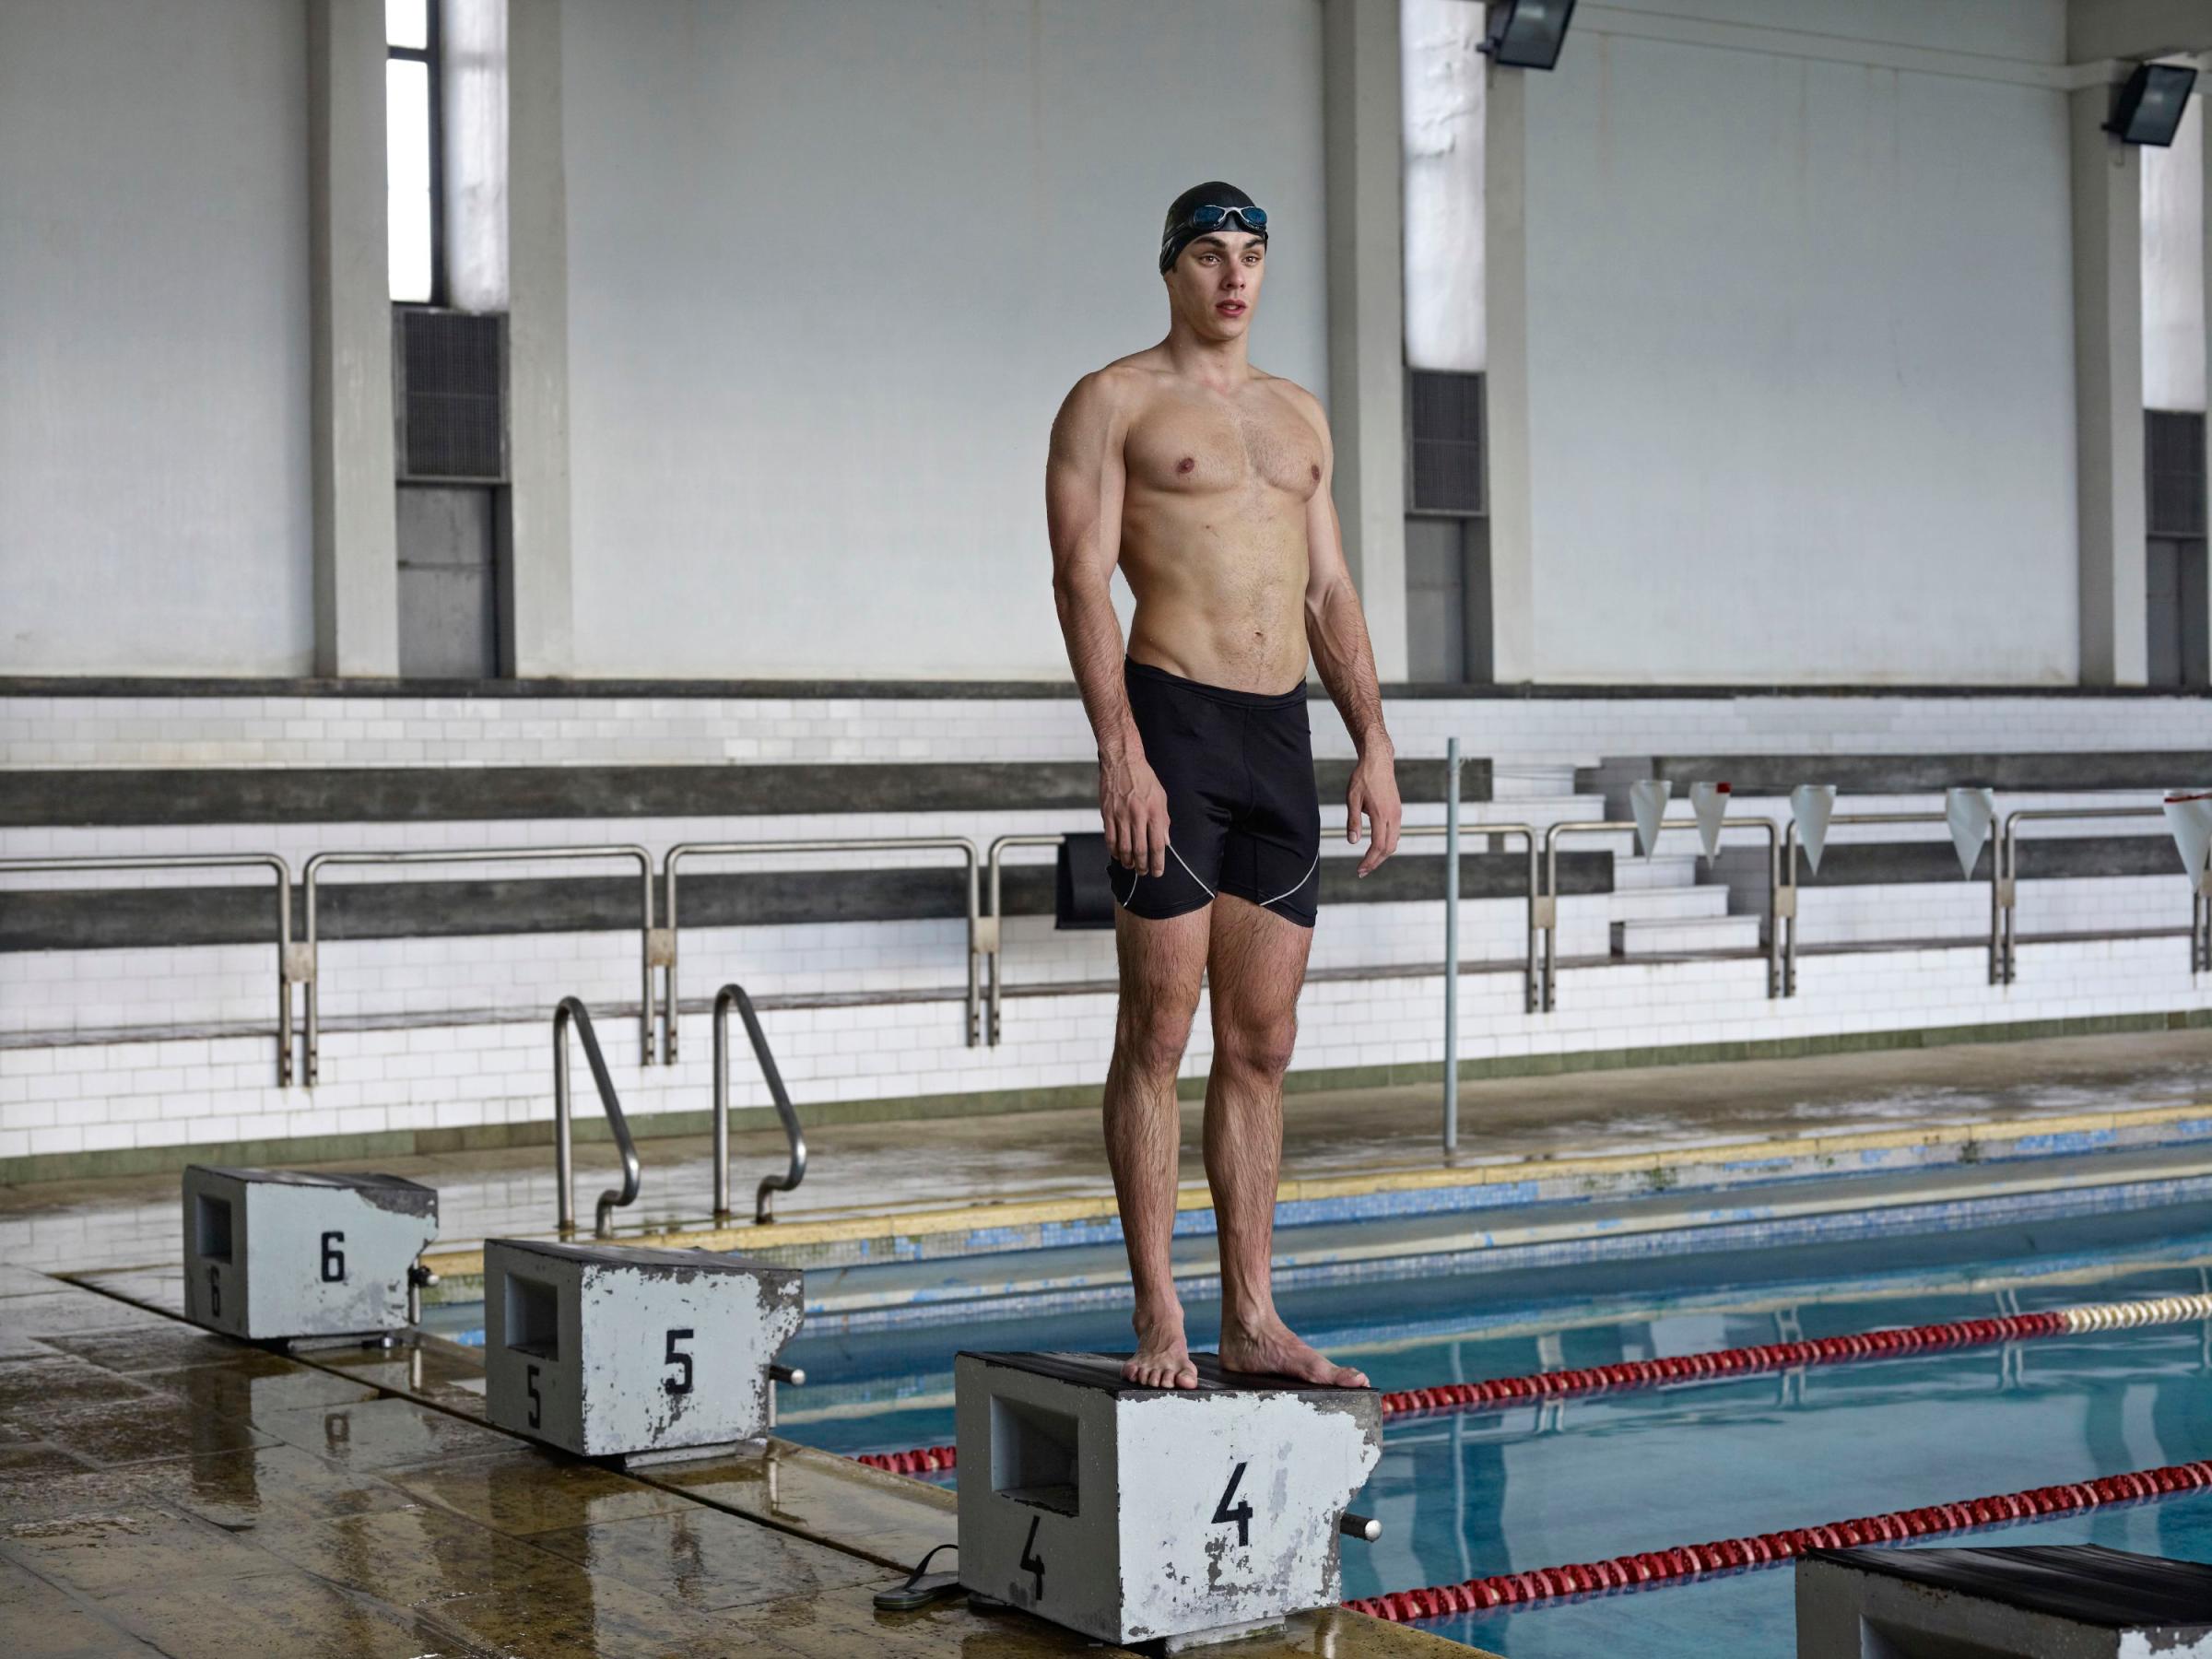 A cadet in the swimming pool of the Academia Militar, Lisbon, Portugal, Dec. 4, 2012.